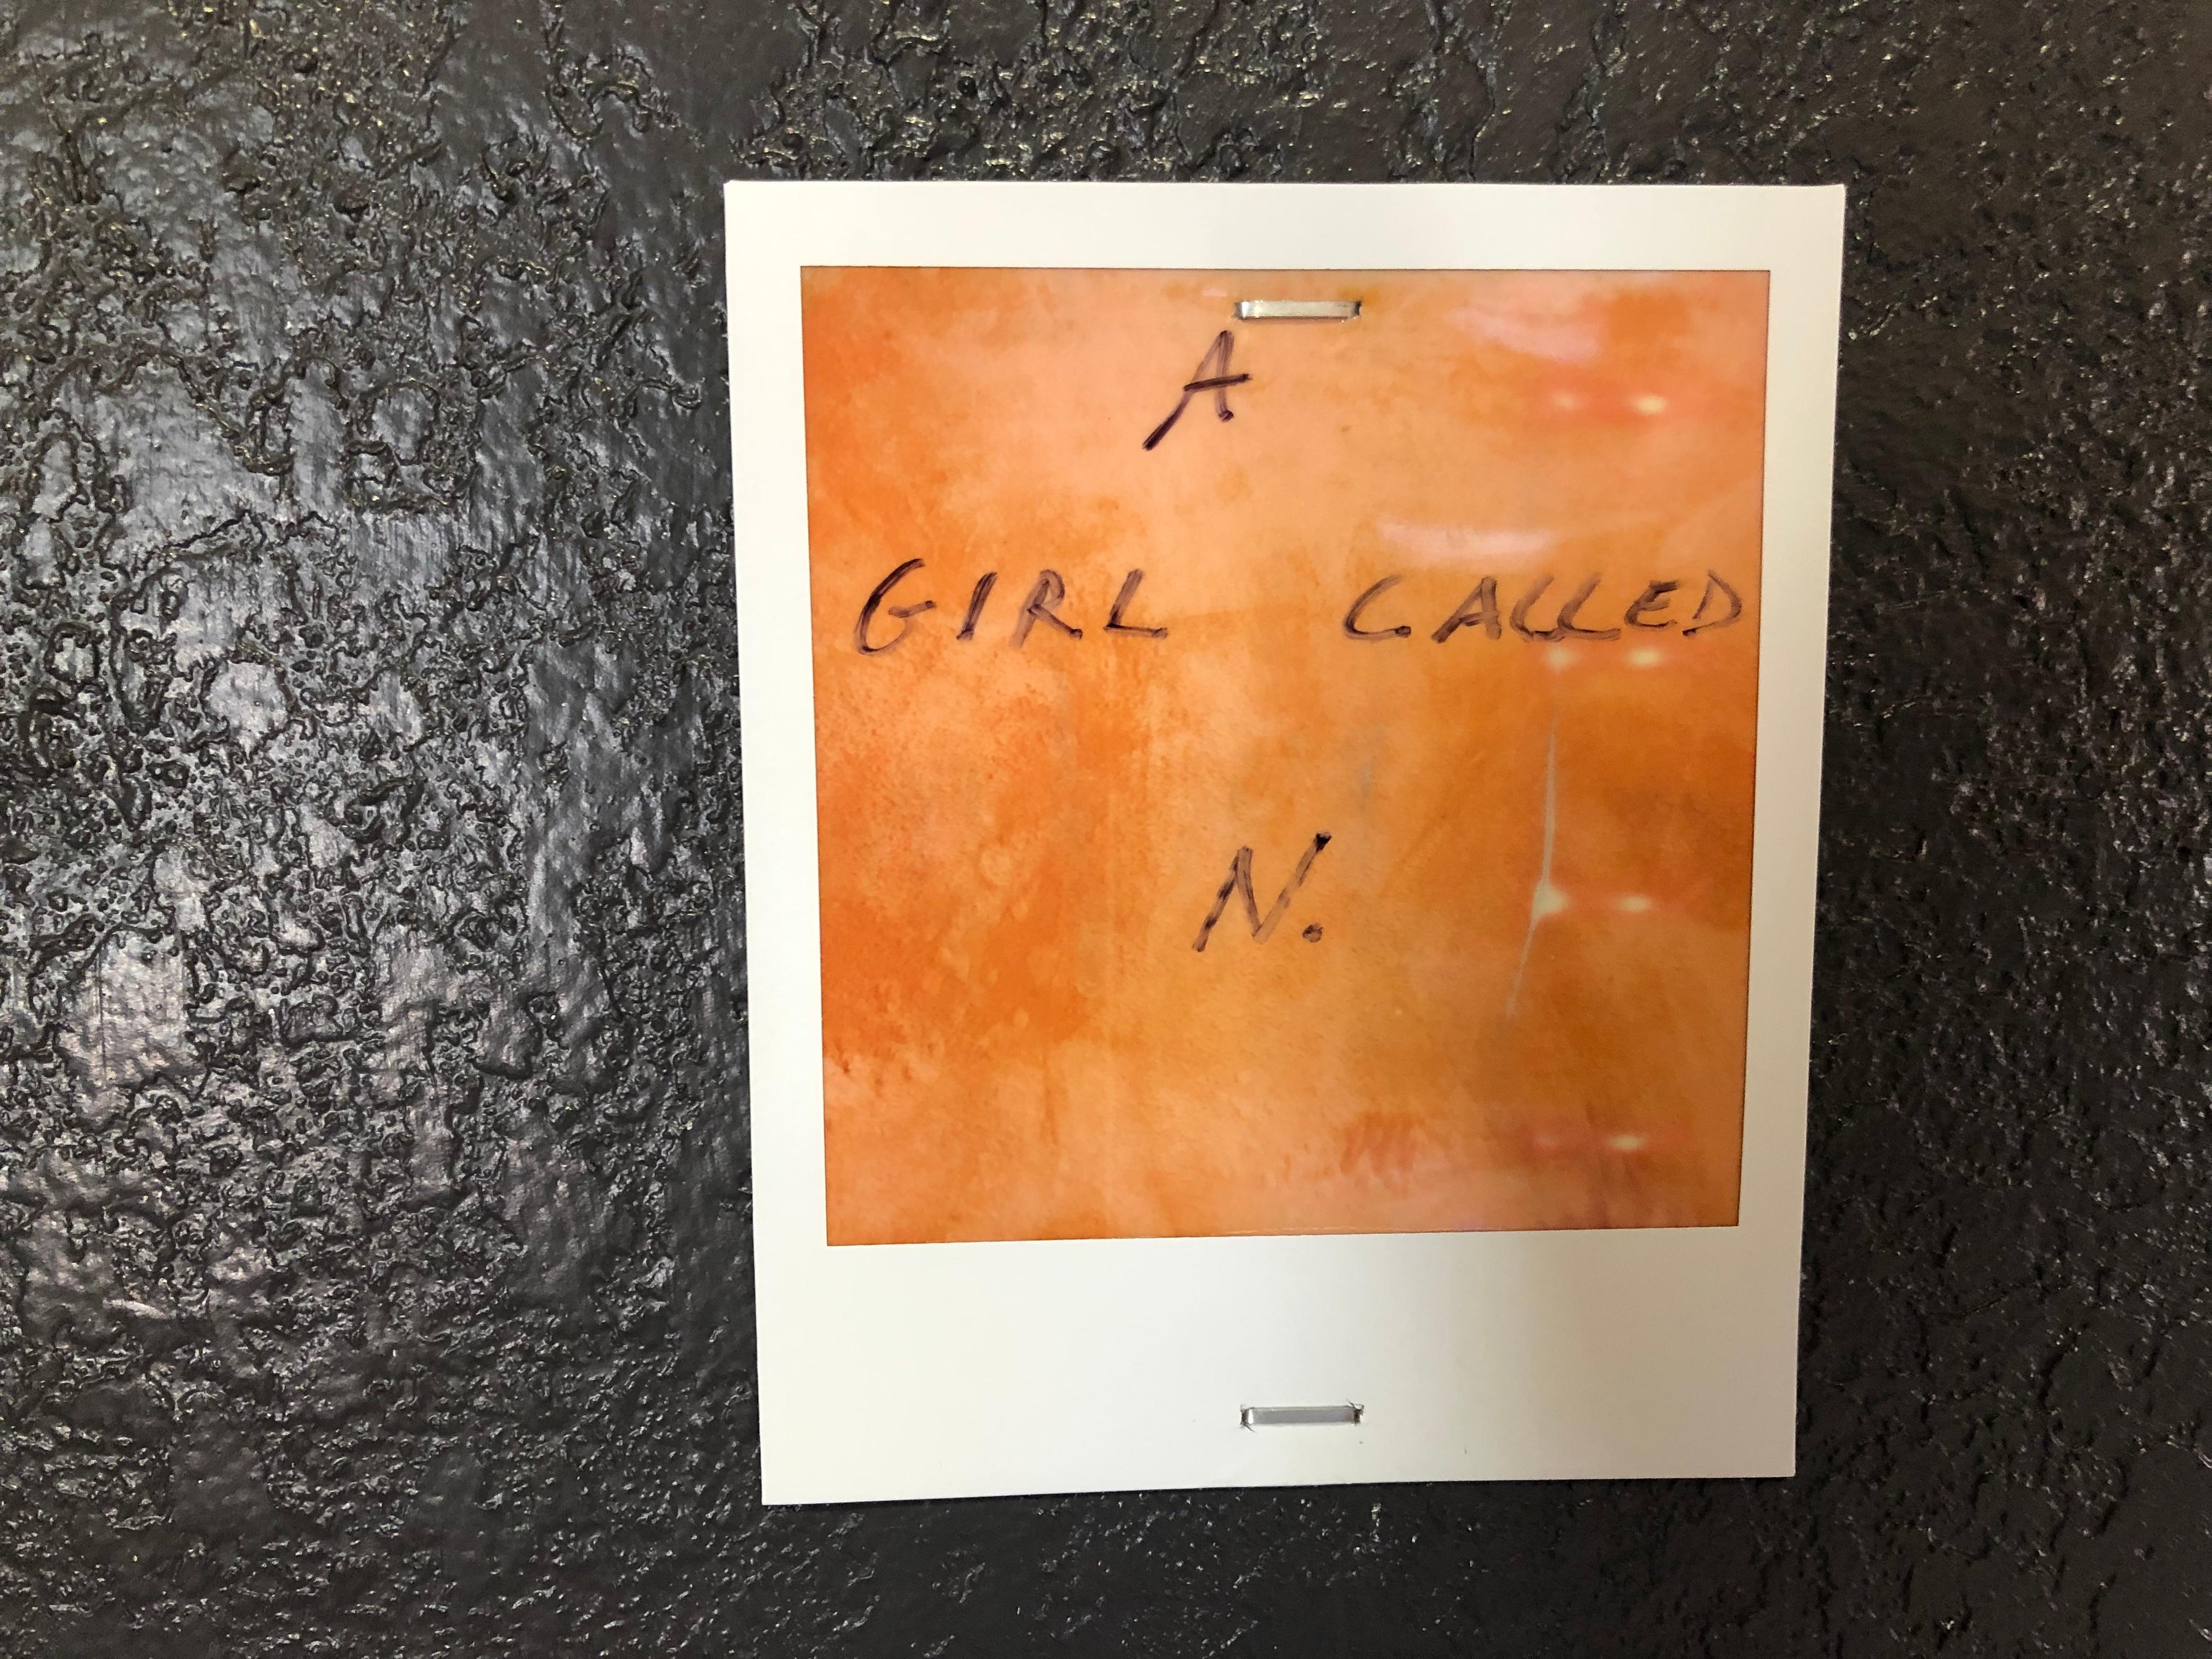 'Golden Brown' part of the series 'A girl called N.' - 2019

20x20cm, 
Edition 2/7 plus 2 Artist Proofs, 
digital C-Print based on a Polaroid,  
Signed on the back and with certificate. Artist inventory PL2017-198.
Not mounted.

This piece is part